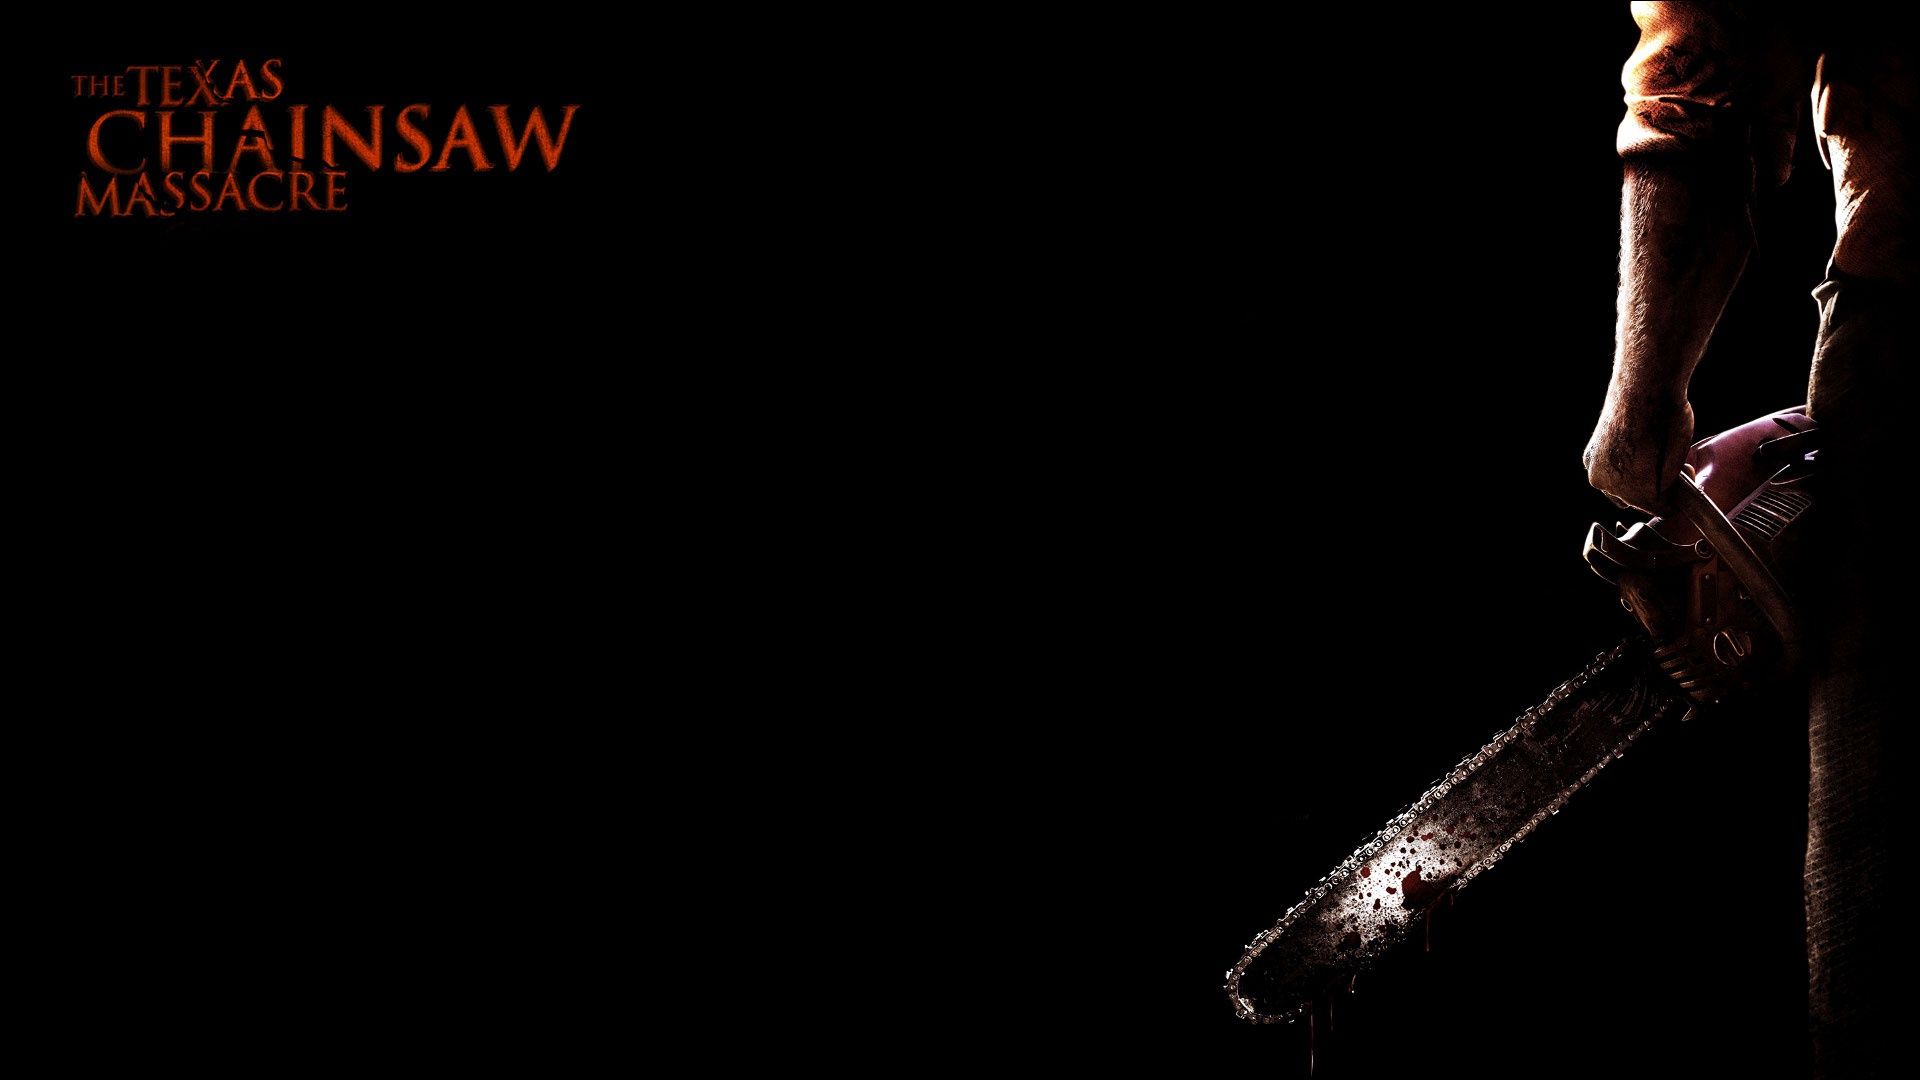 Texas Chainsaw Massacre Wallpapers HD Backgrounds